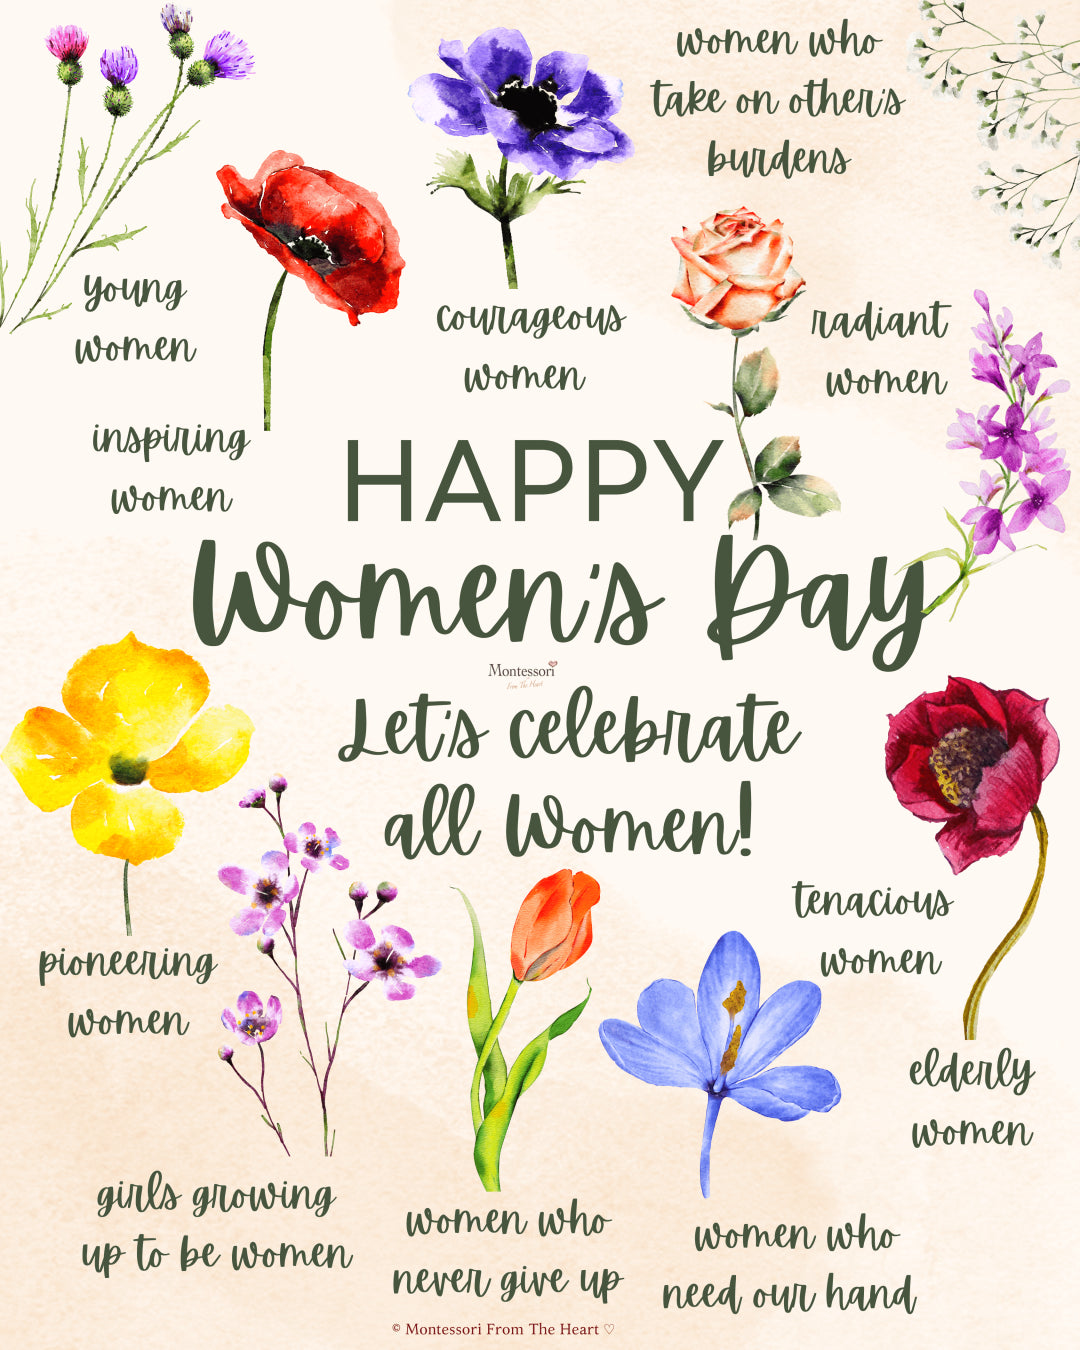 Happy International Women’s Day from us at Synergy RP!! The Synergy